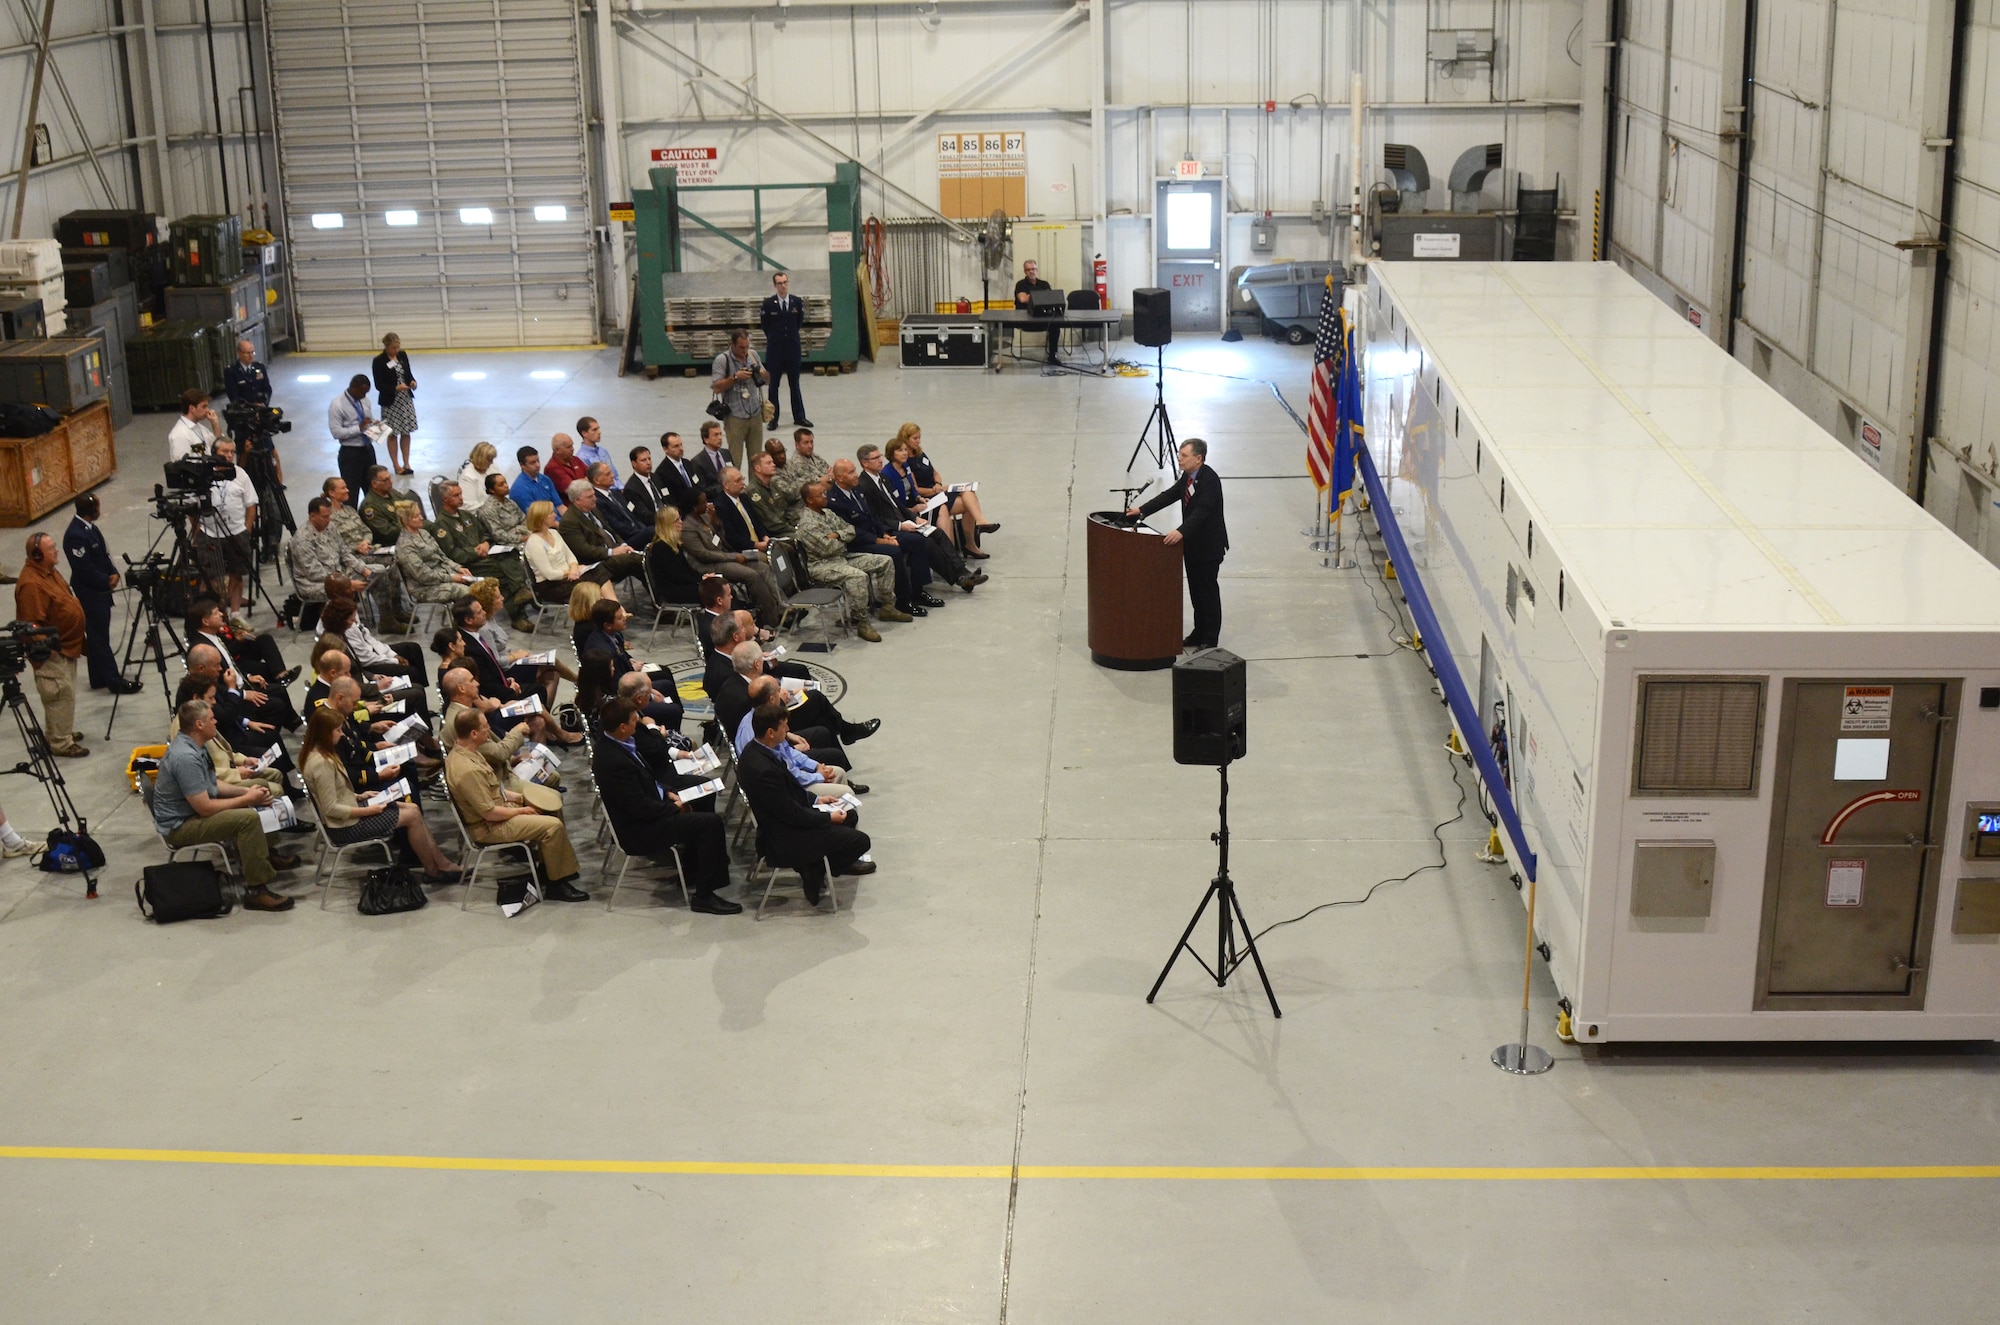 Patrick Kennedy, Under Secretary of Management from the United States Department of State, addresses an audience of personnel from the Department of State, MRI Global, Paul Allen Foundation and members of the 94th Airlift Wing at an unveiling of the DOS Containerized Biocontainment System held at Dobbins Air Reserve Base, Ga. Aug. 11, 2015. (U.S. Air Force photo/Don Peek)